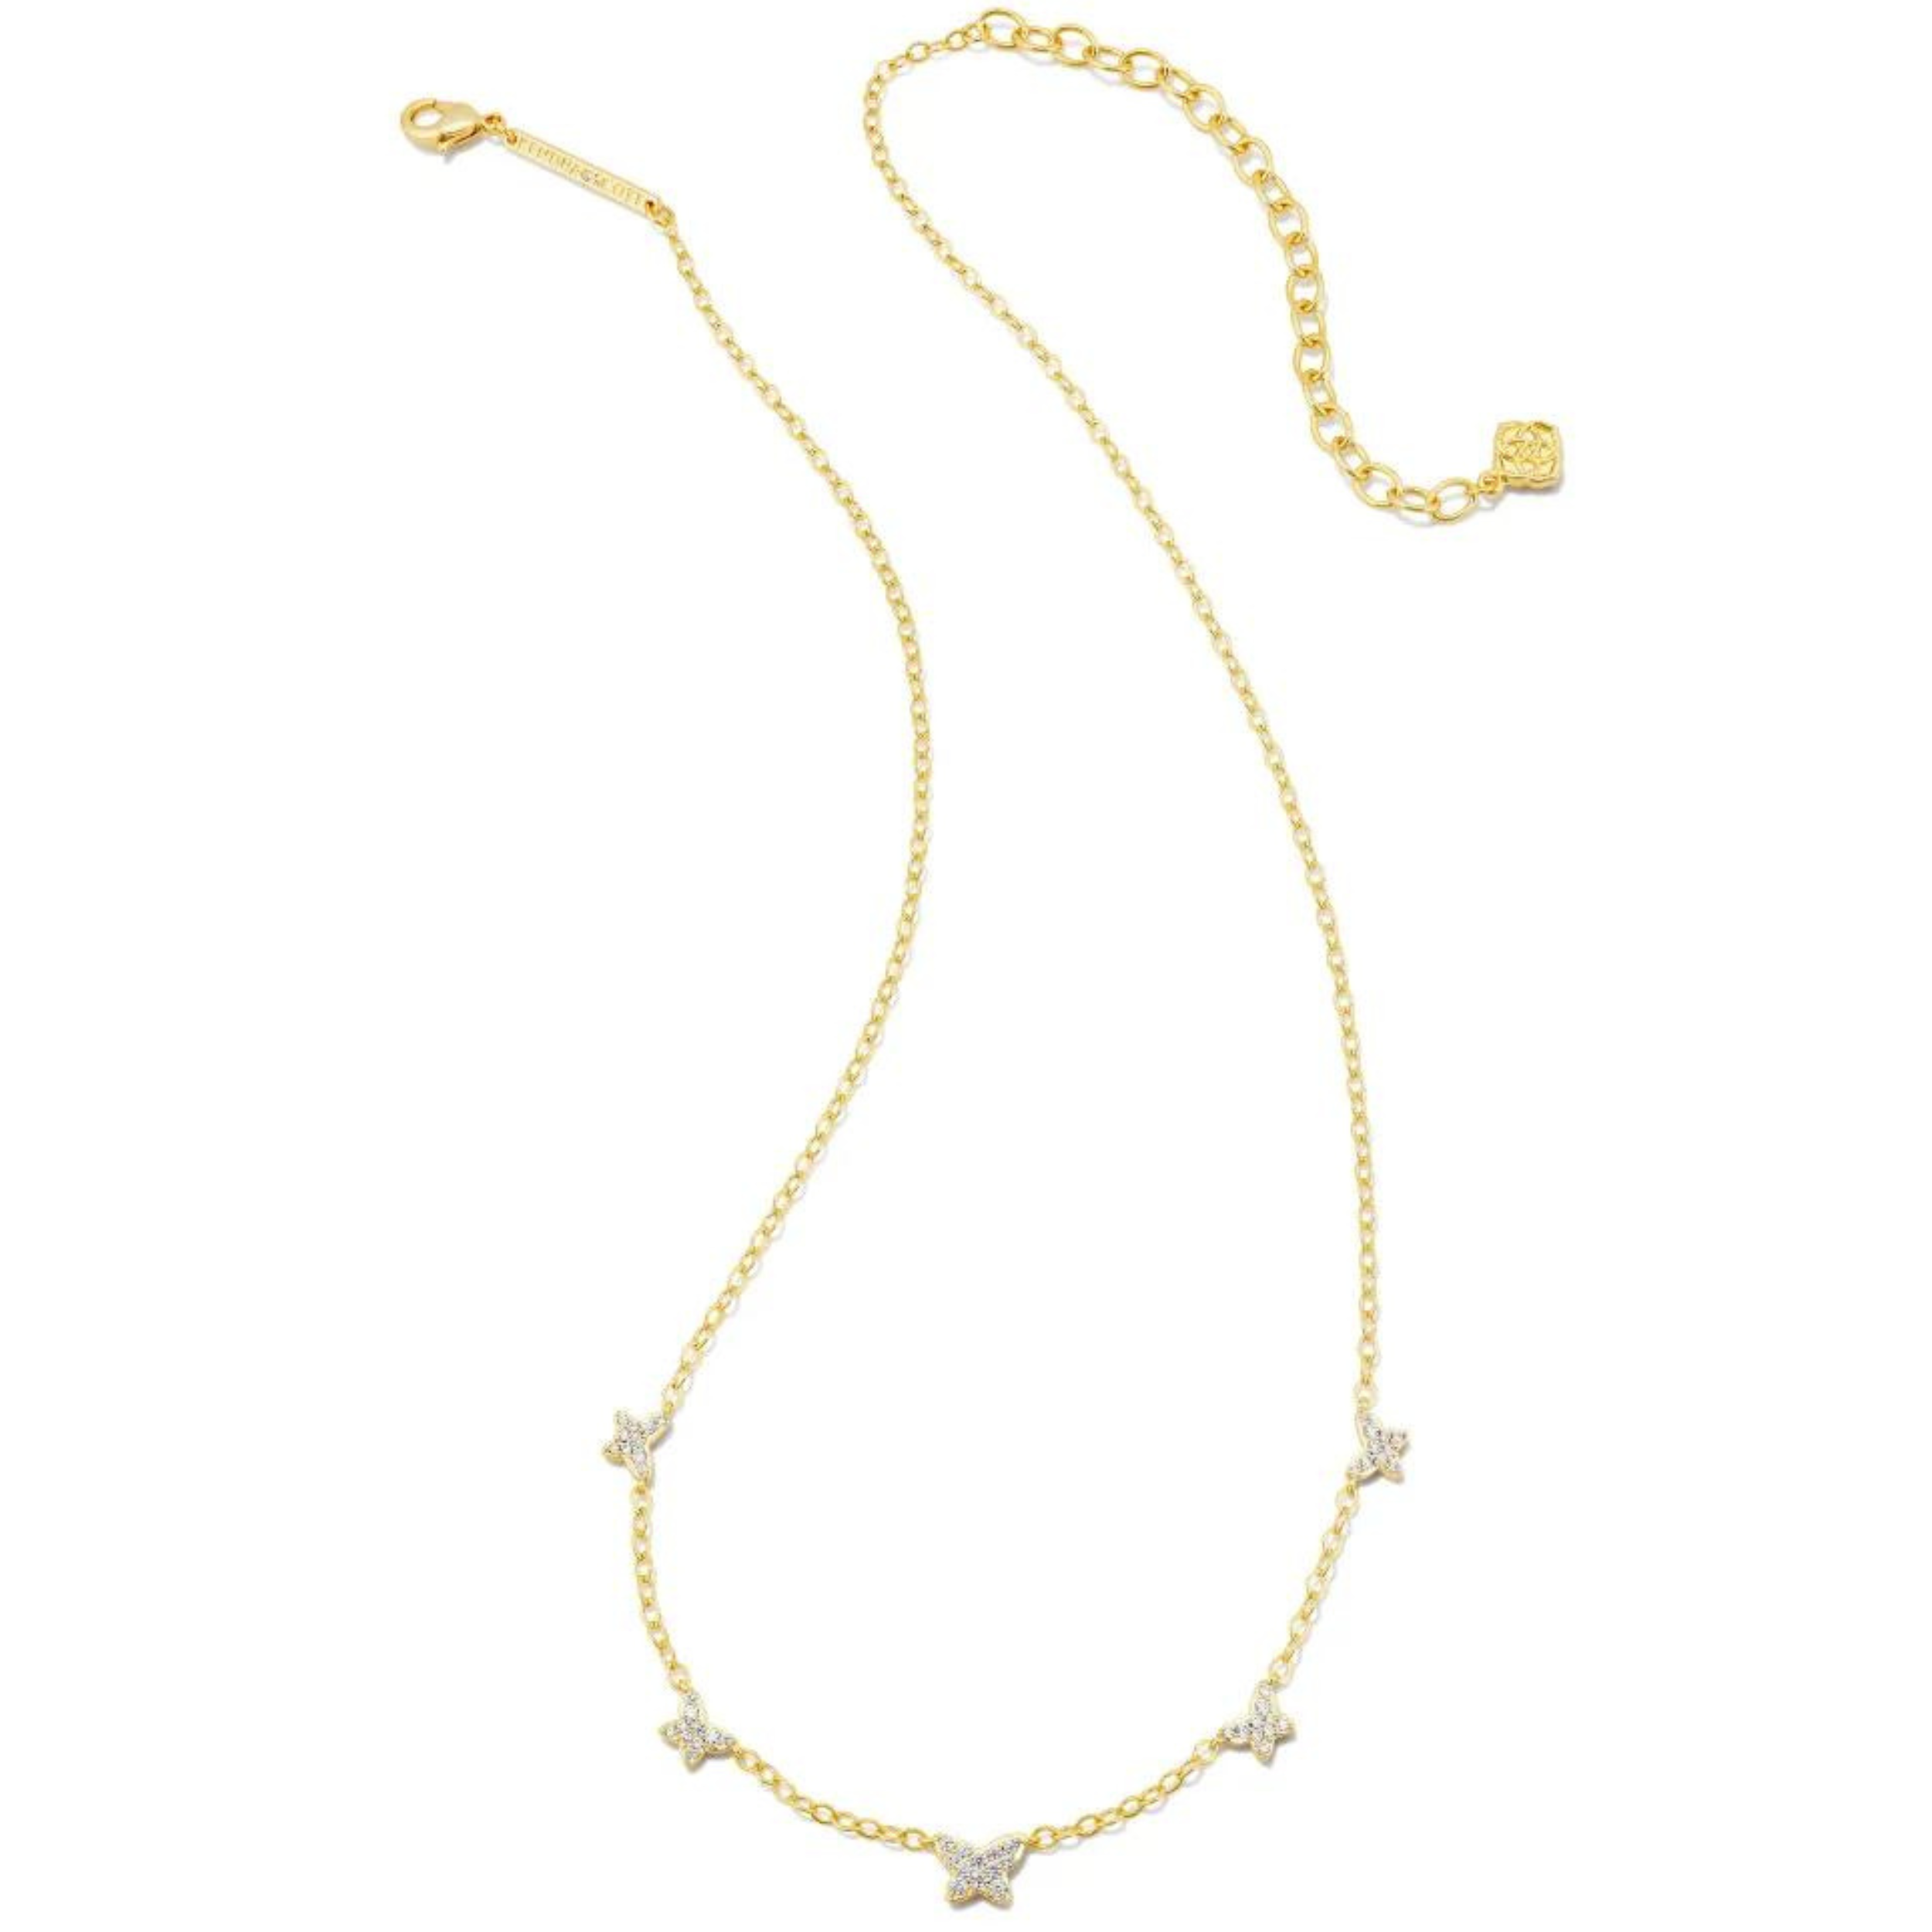 Gold necklace with five tiny white crystal butterflies, pictured on a white background.